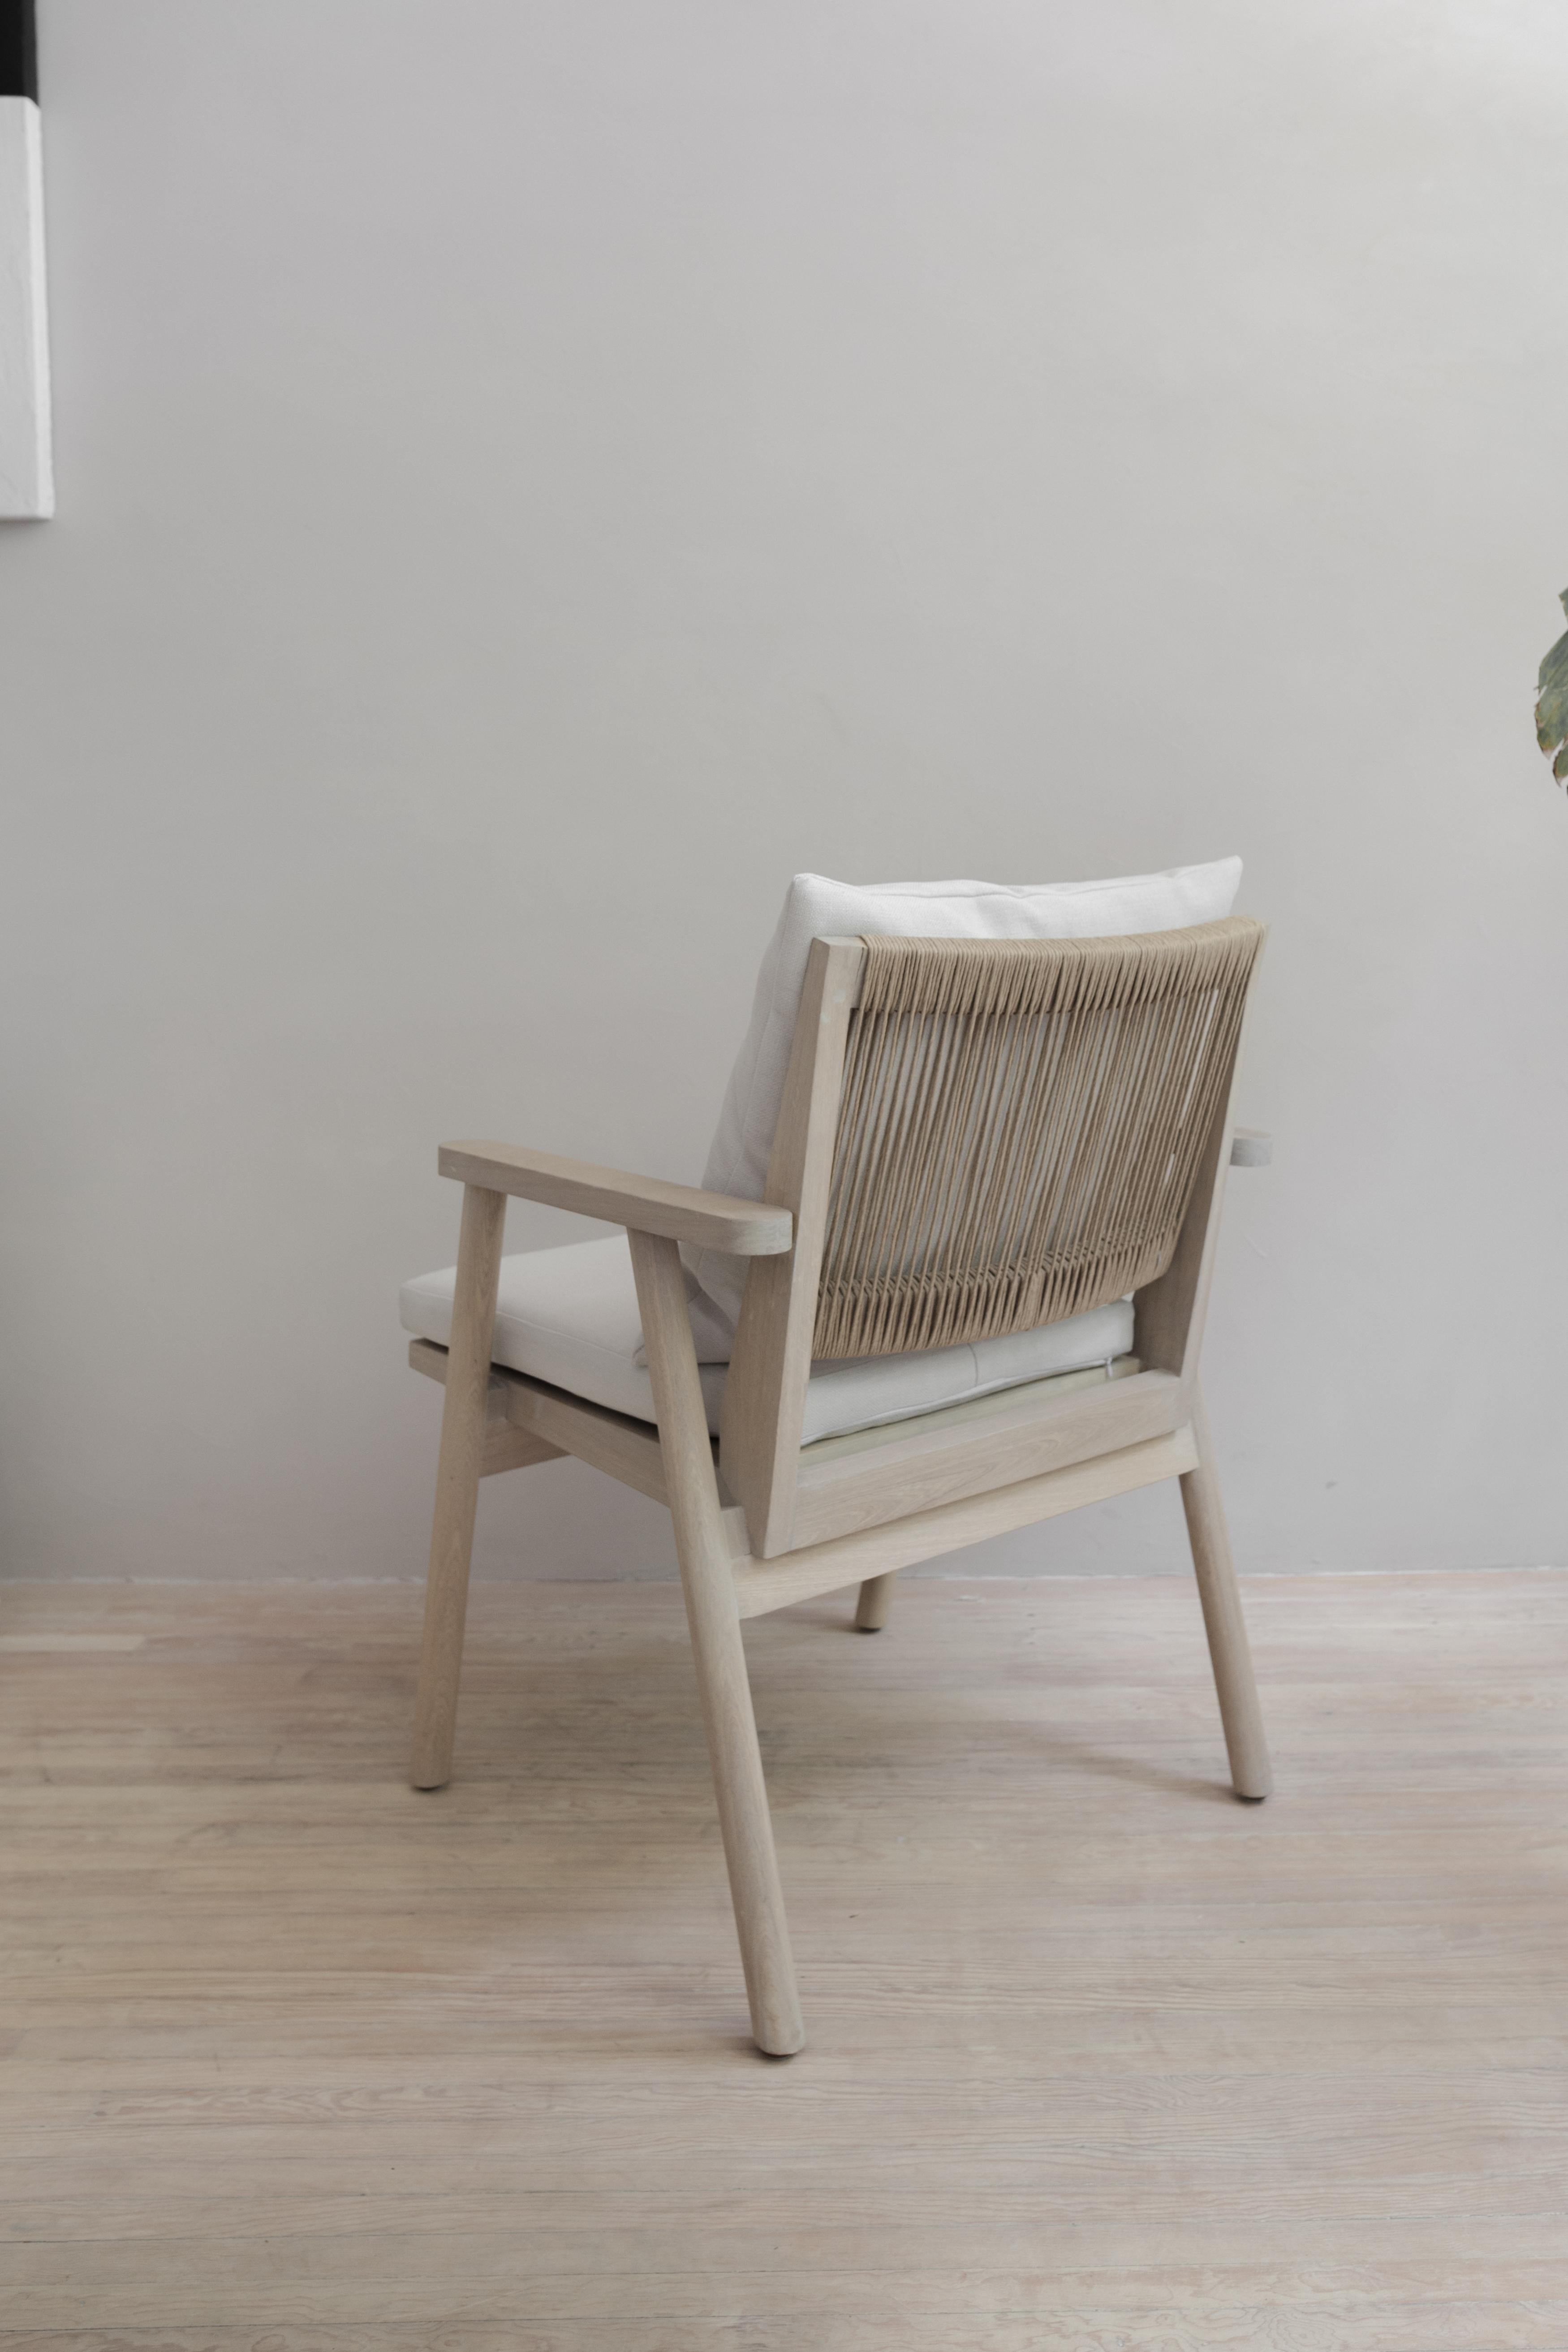 Mexican Hala Wood Chair For Sale